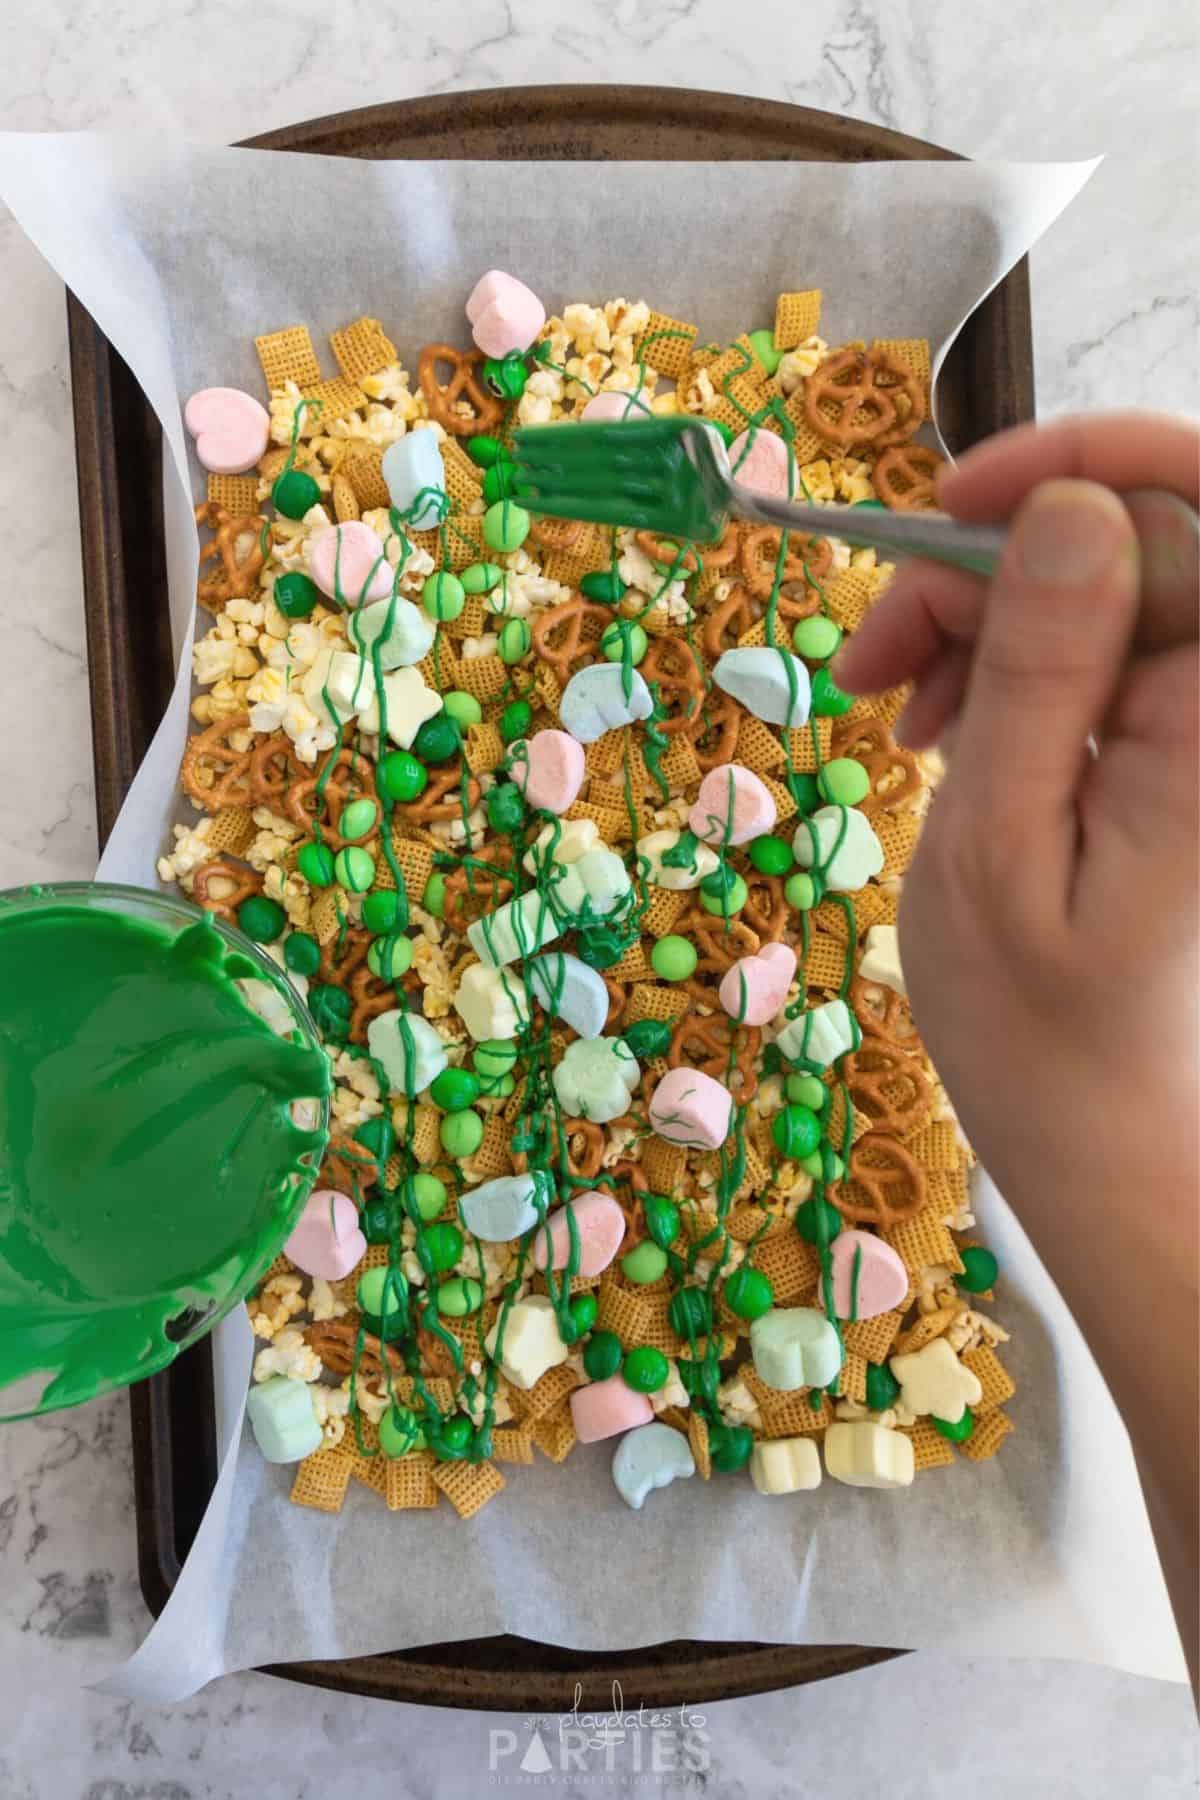 Drizzling green candy melts on Leprechaun bait snack mix.